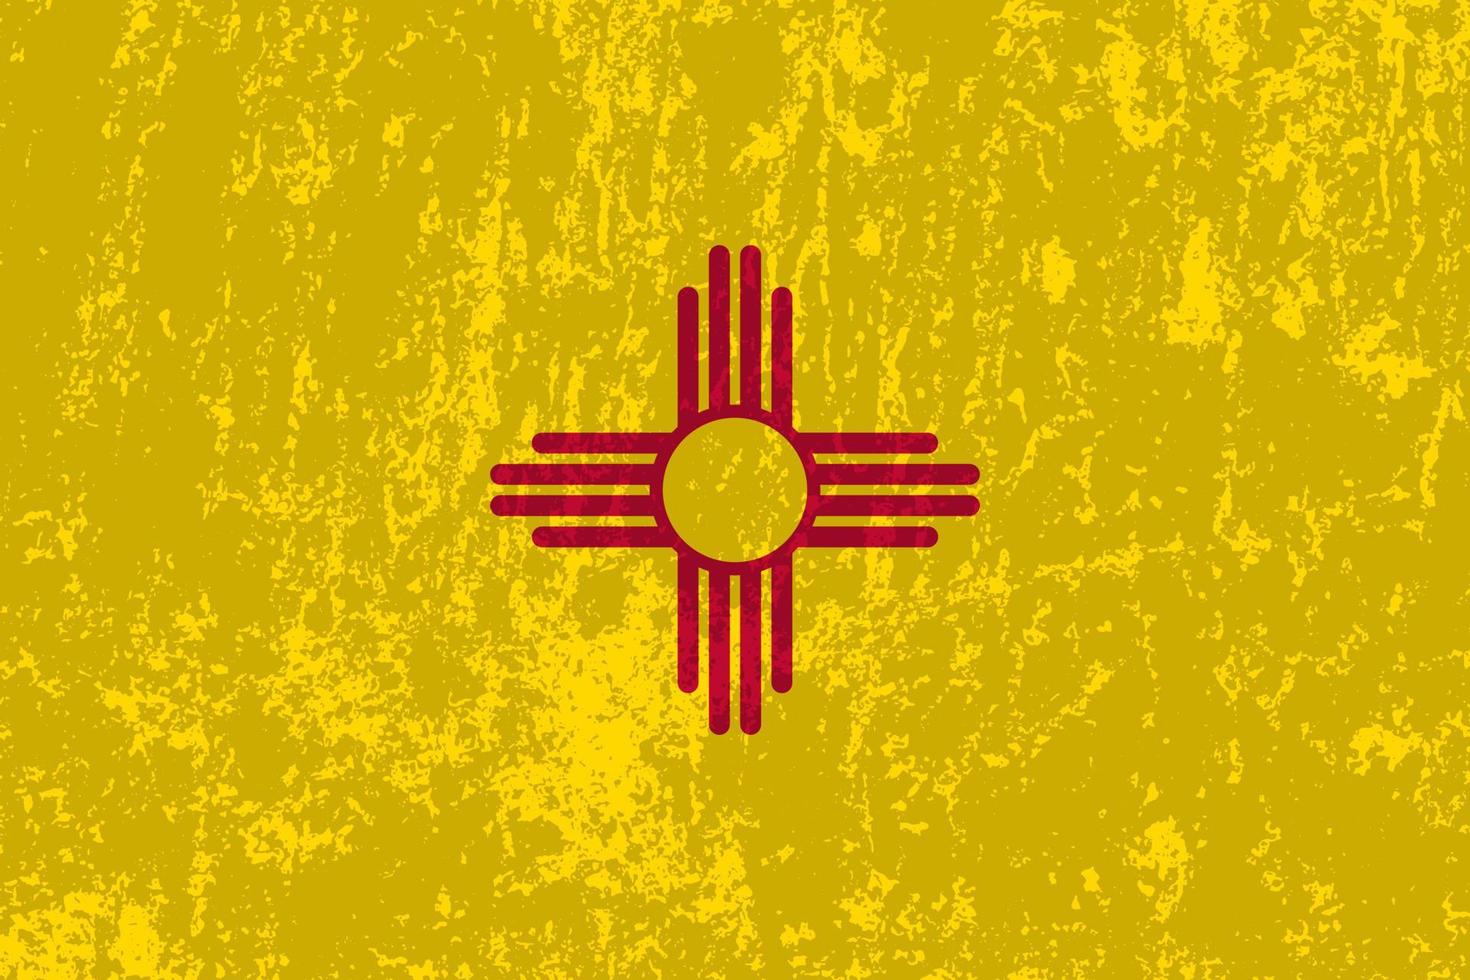 New Mexico state grunge flag. Vector illustration.